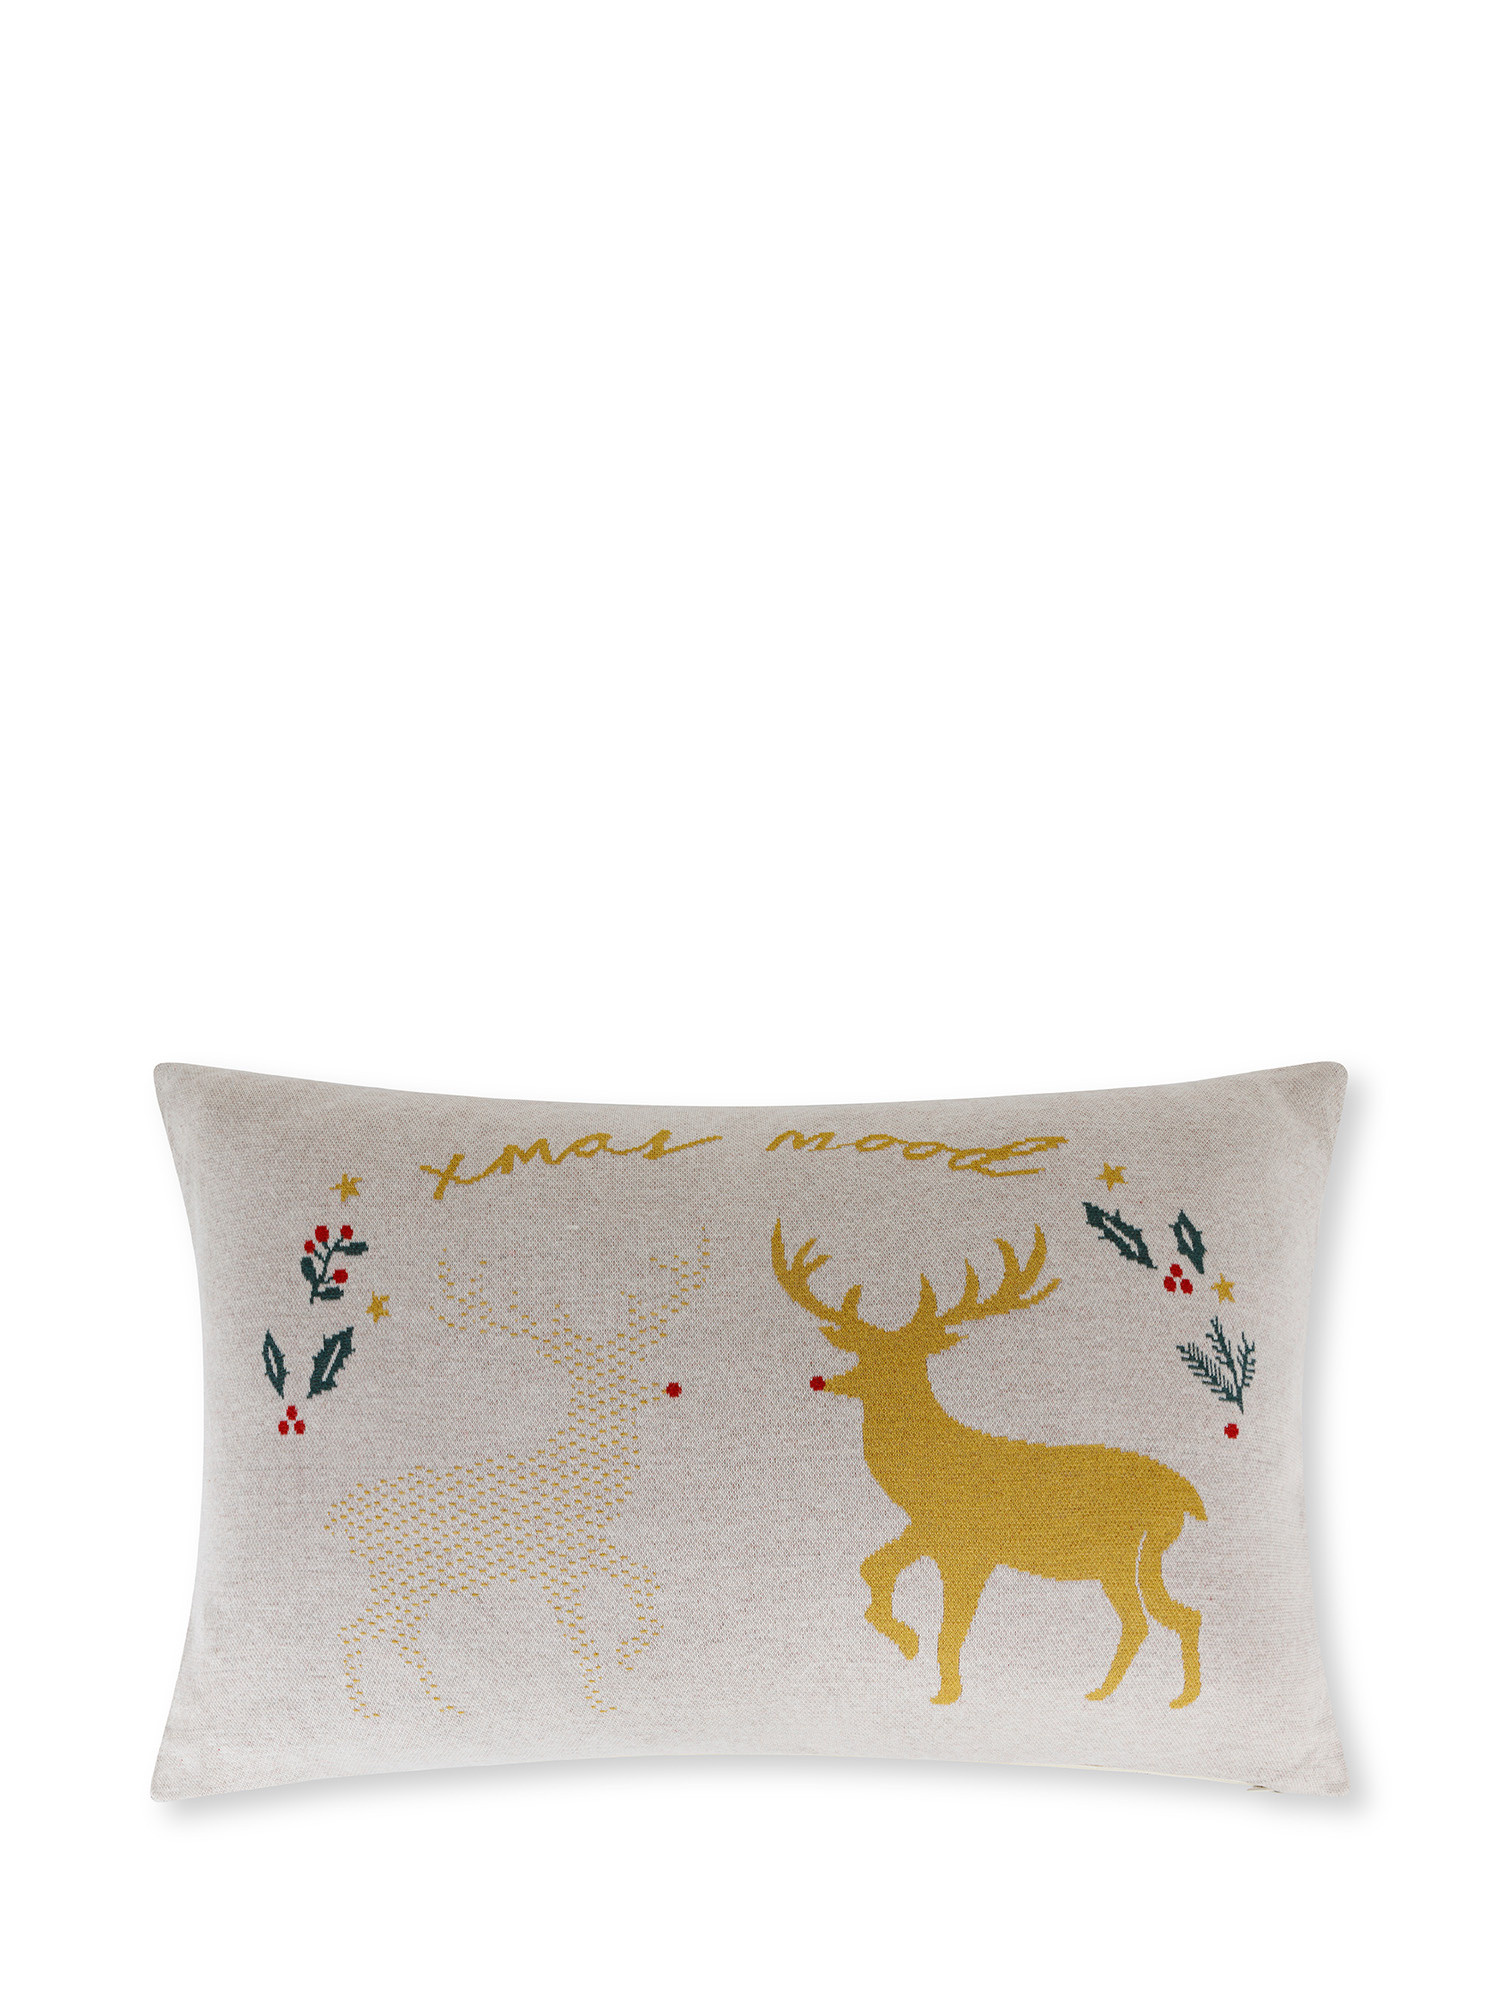 Jacquard knit cushion with reindeer 40x60 cm, White, large image number 1